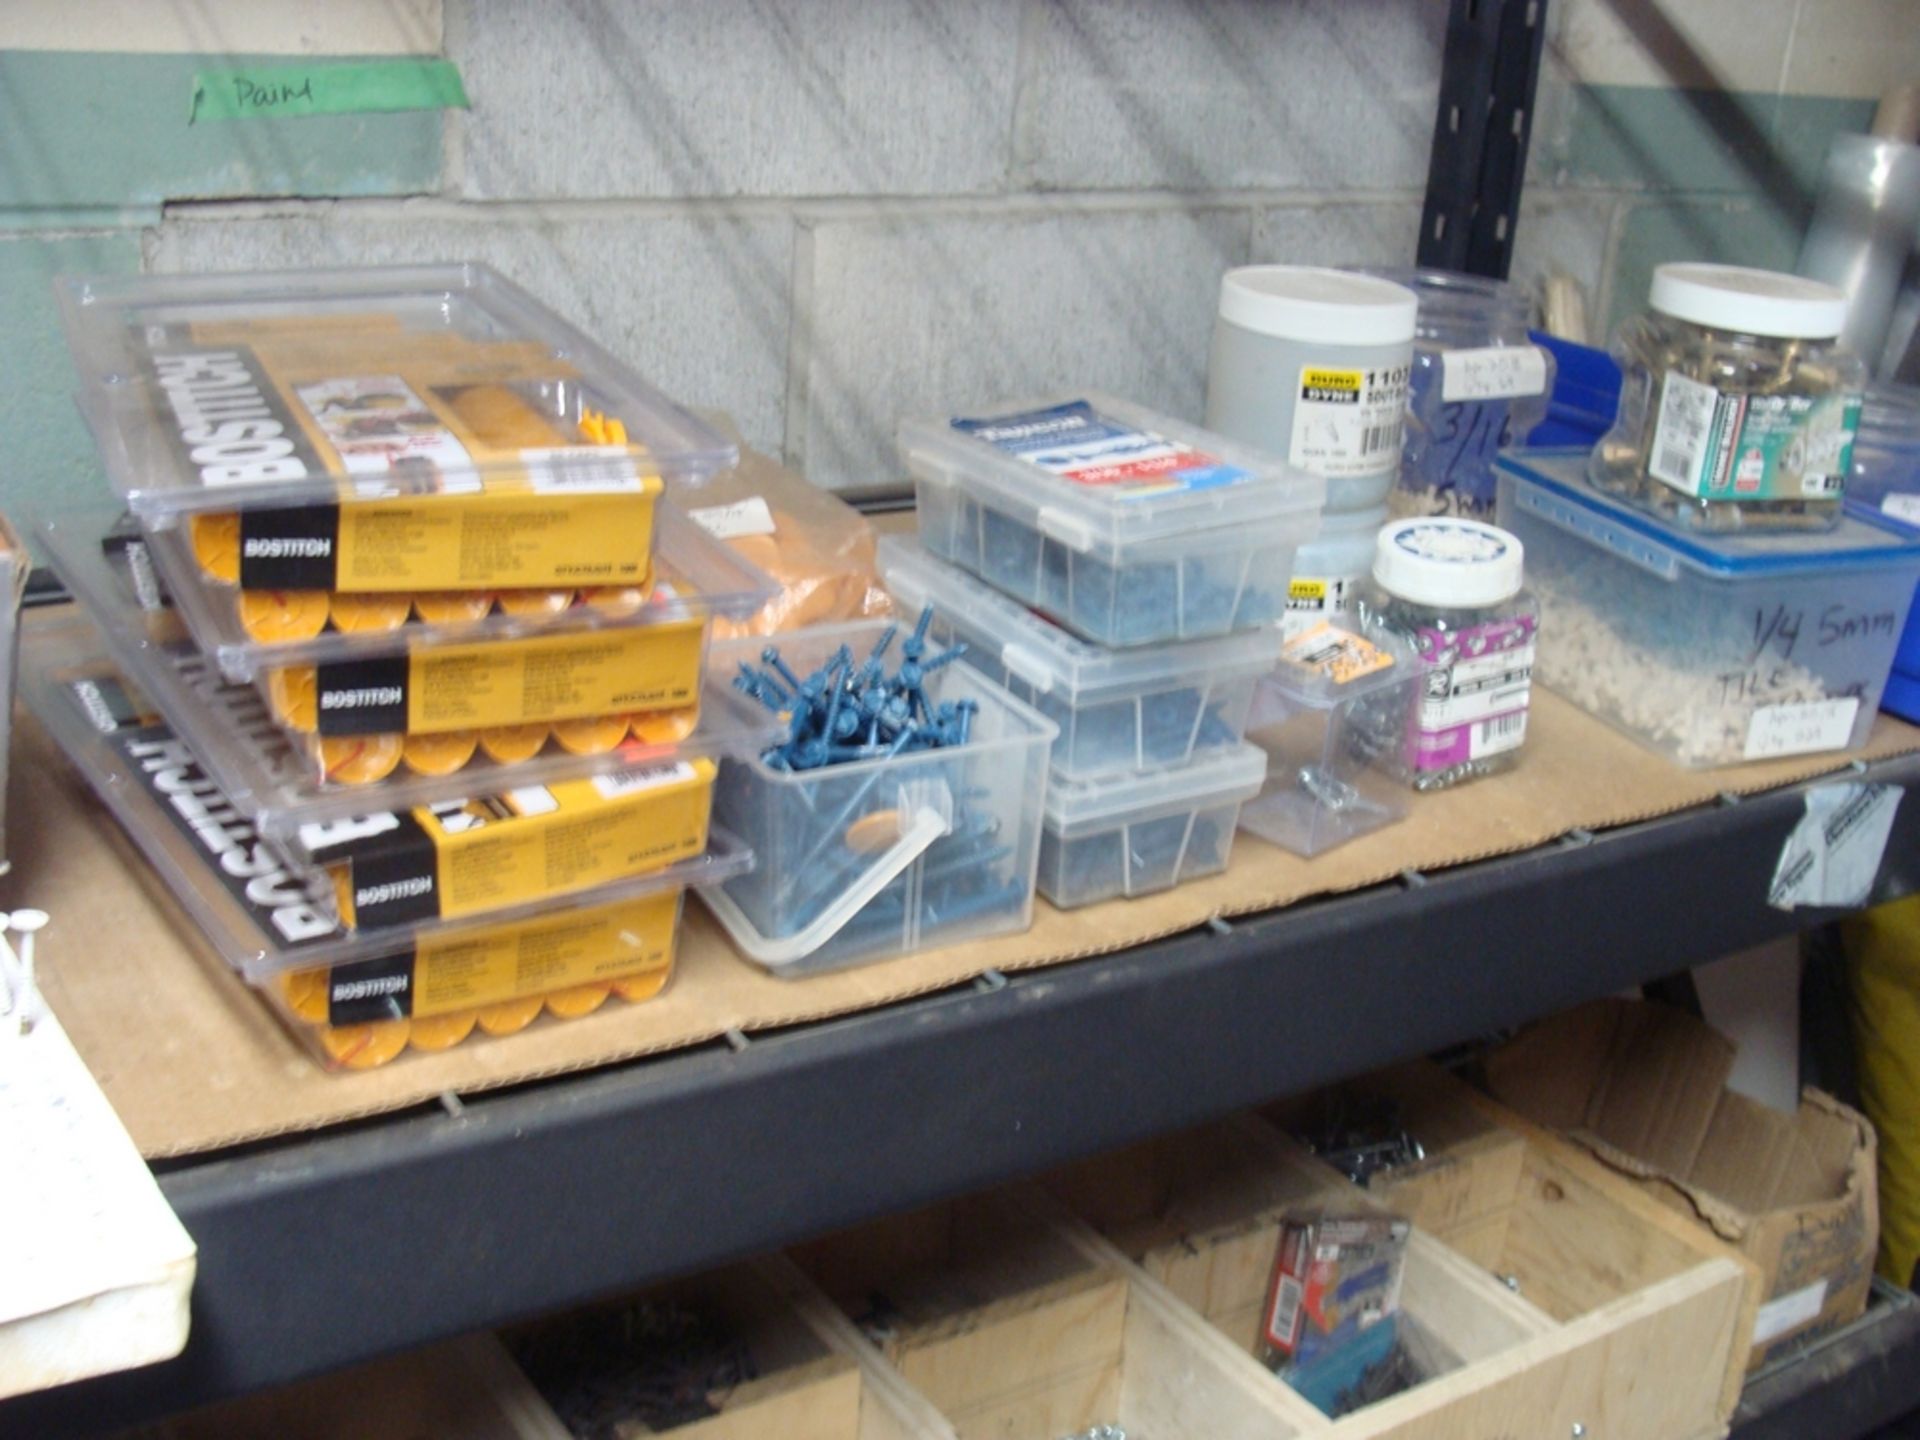 LOT OF ASST. SCREWS, NAILS, WASHERS, ETC. - Image 4 of 7